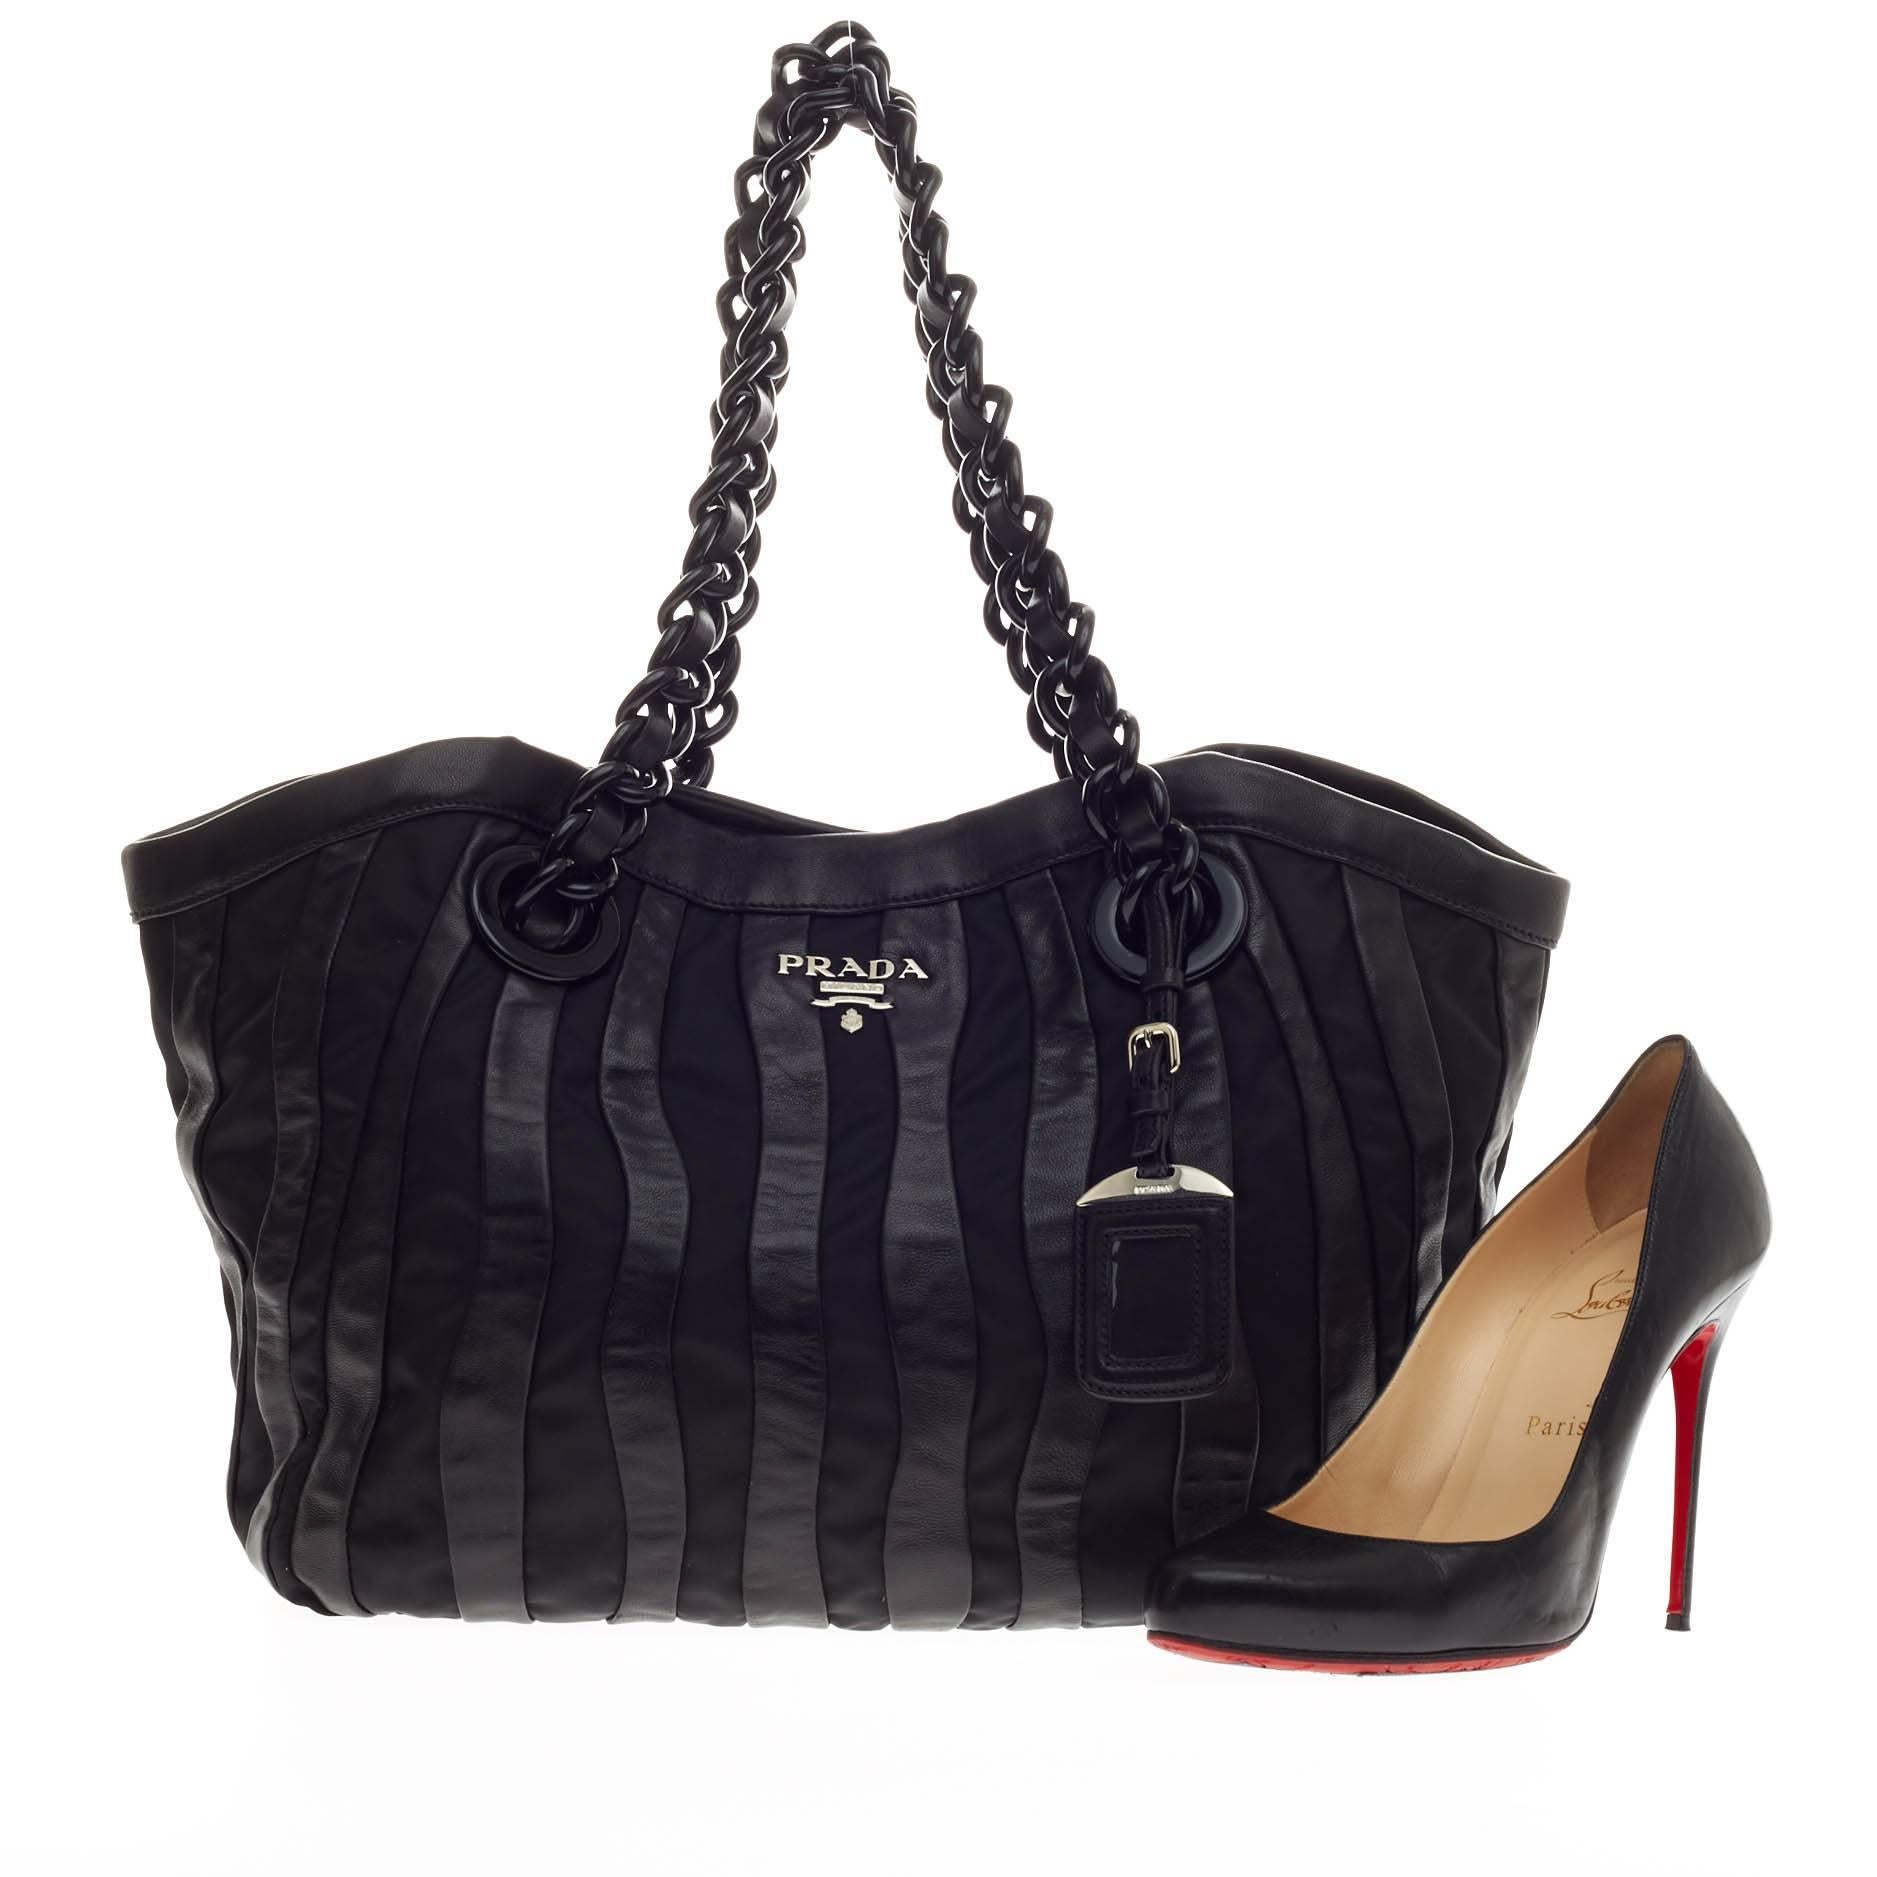 This authentic Prada Waves Chain Tote Leather and Tessuto Large is a stylish an functional everyday bag perfect for the modern woman. Crafted from alternating black nylon and leather stripes, this pleated bag is accented with silver raised Prada